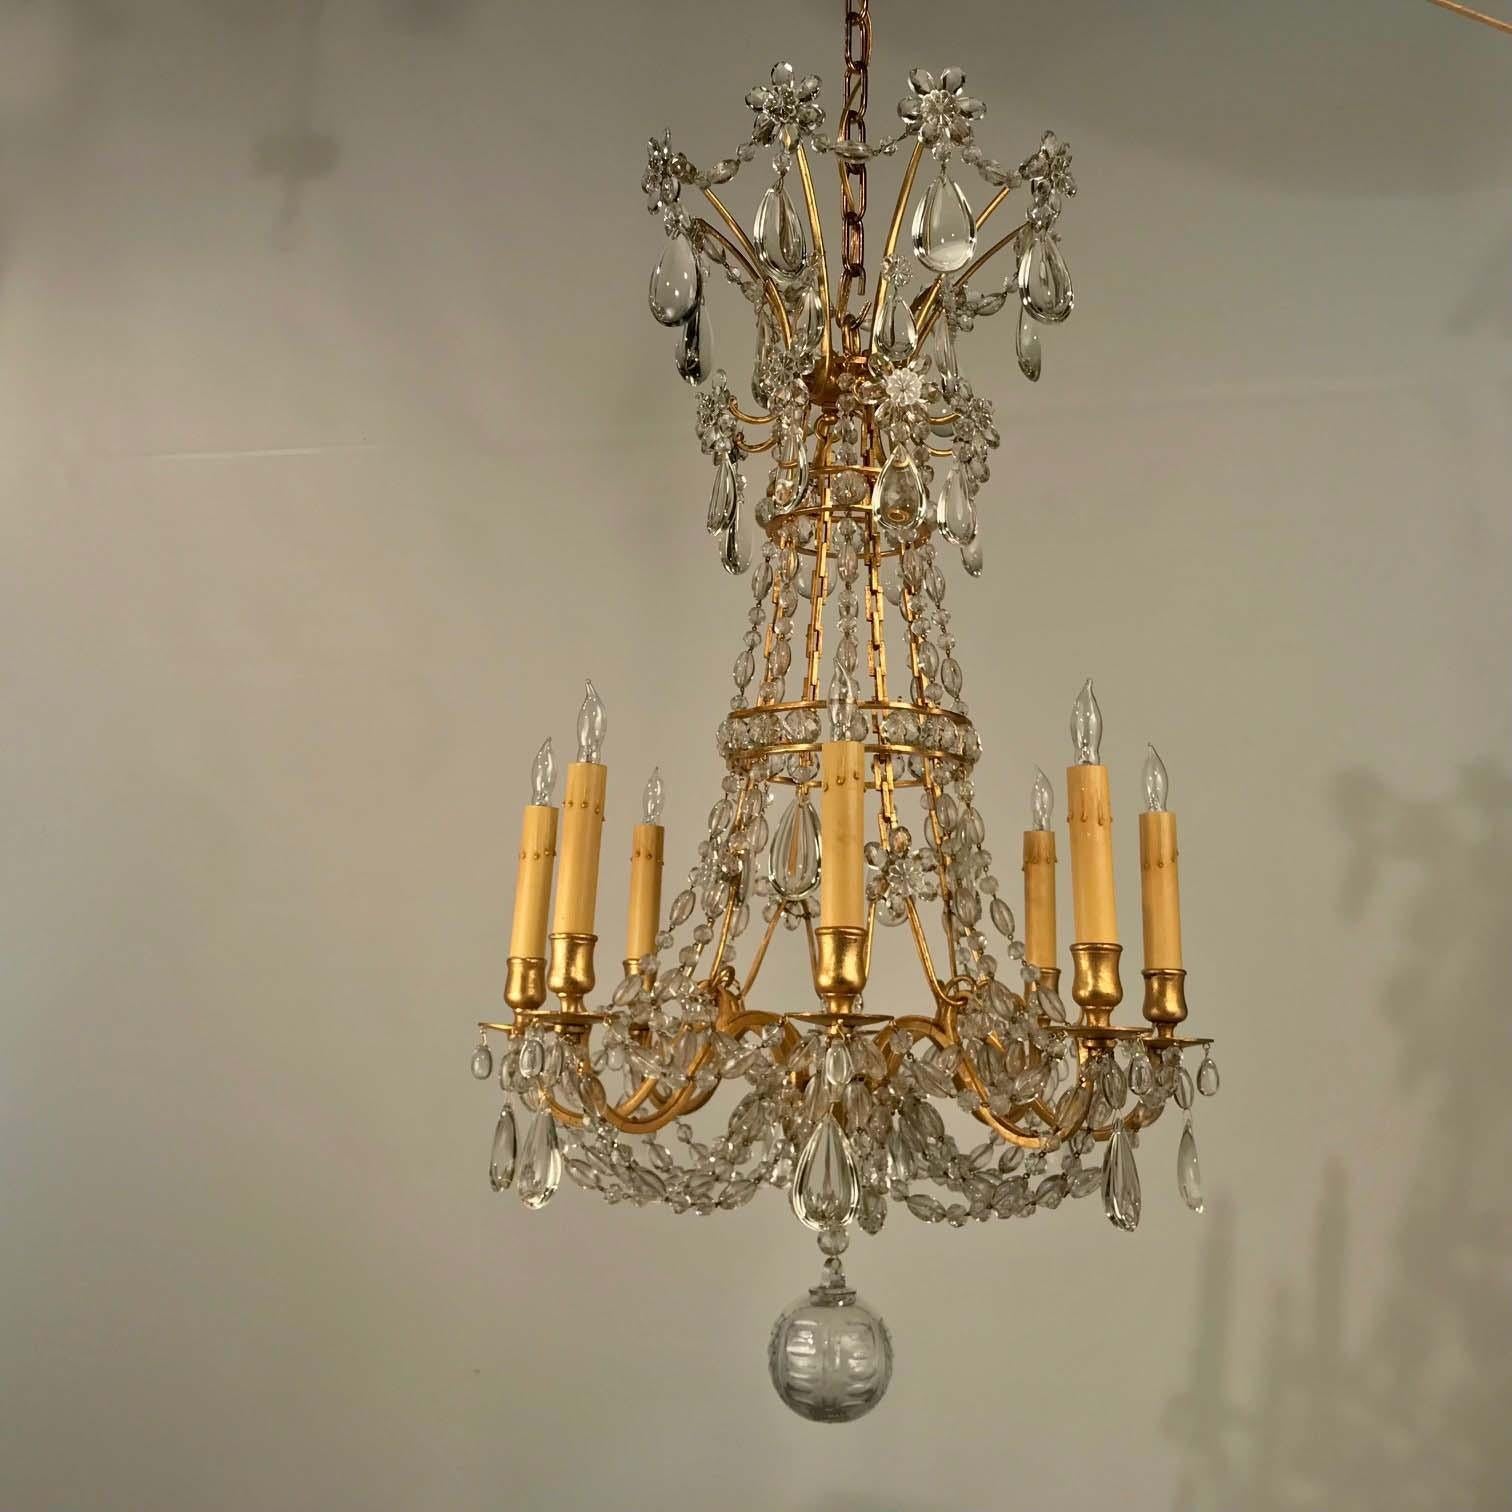 This elegant chandelier has come to us in original condition requiring only careful cleaning and regilding the frame. From the swagged crown to the hand-blown ball, it is hung with a great variety of drops of unusually high quality.